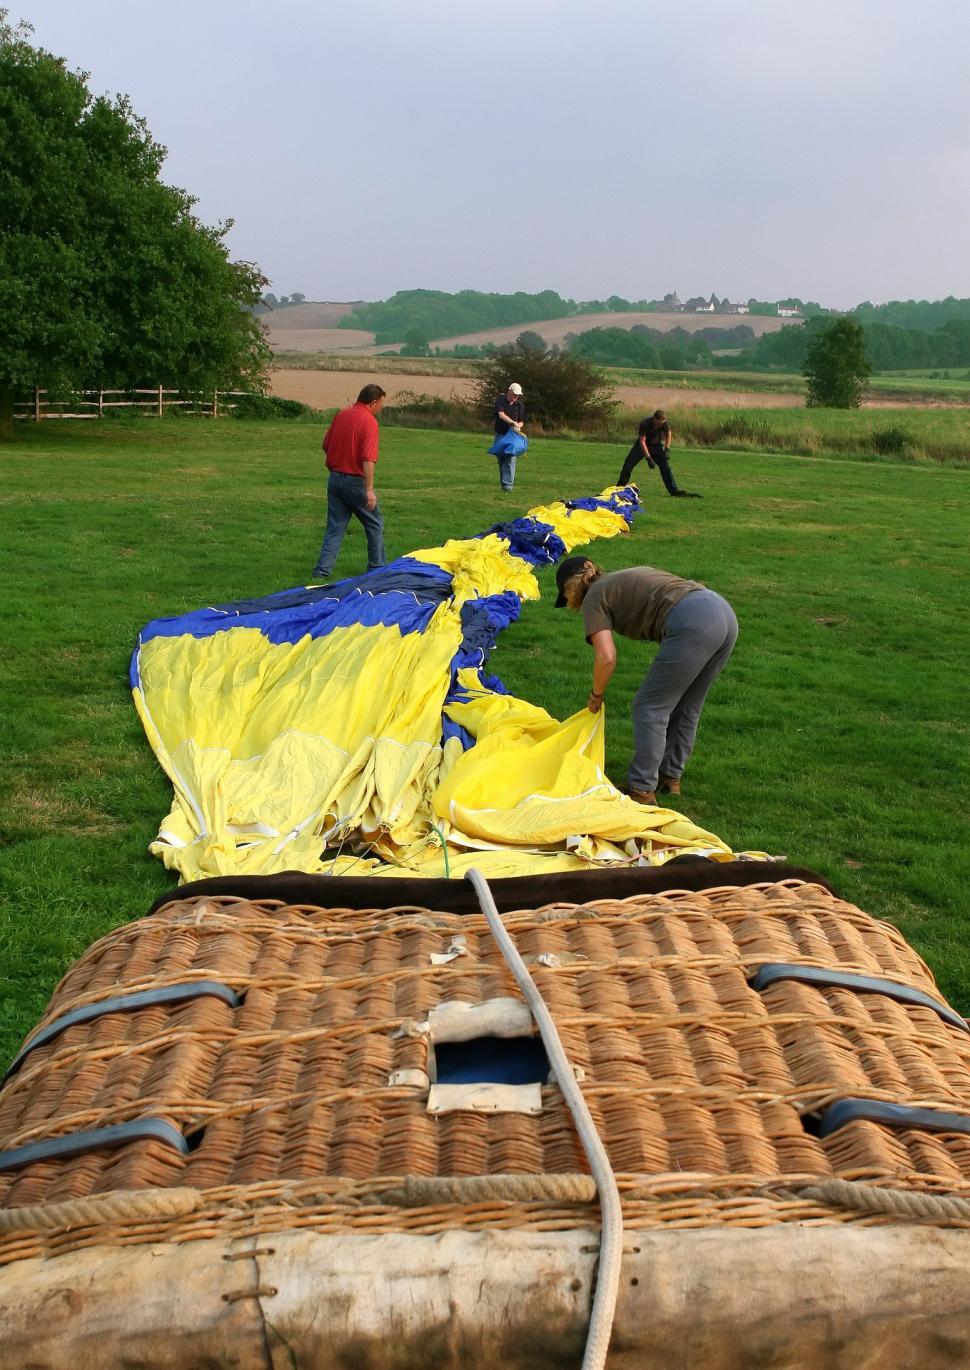 Free Image of Group of People Working on a Kite in a Field 